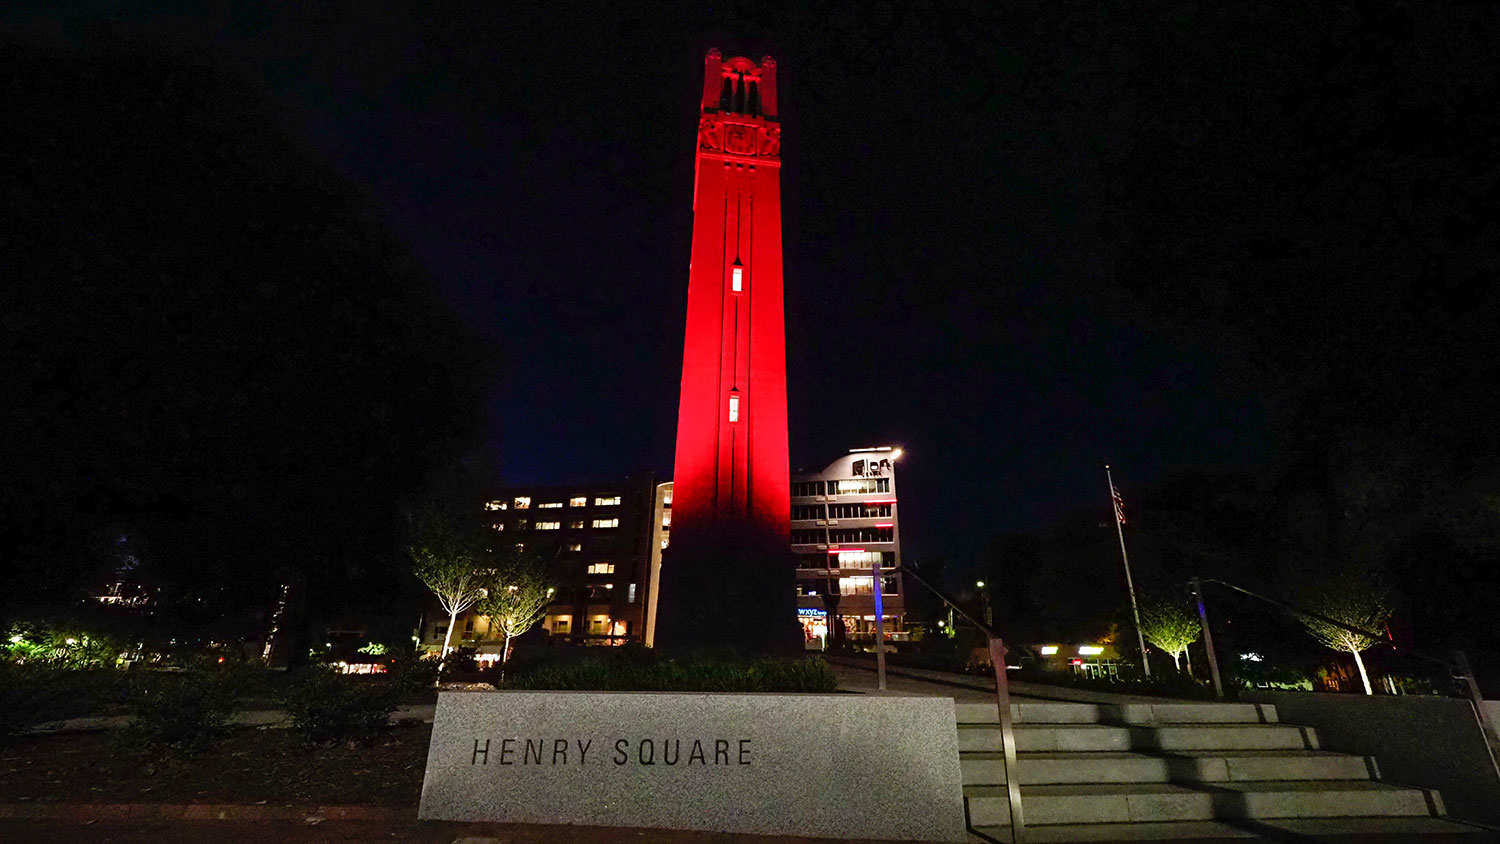 NC State's Memorial Belltower lit red at night